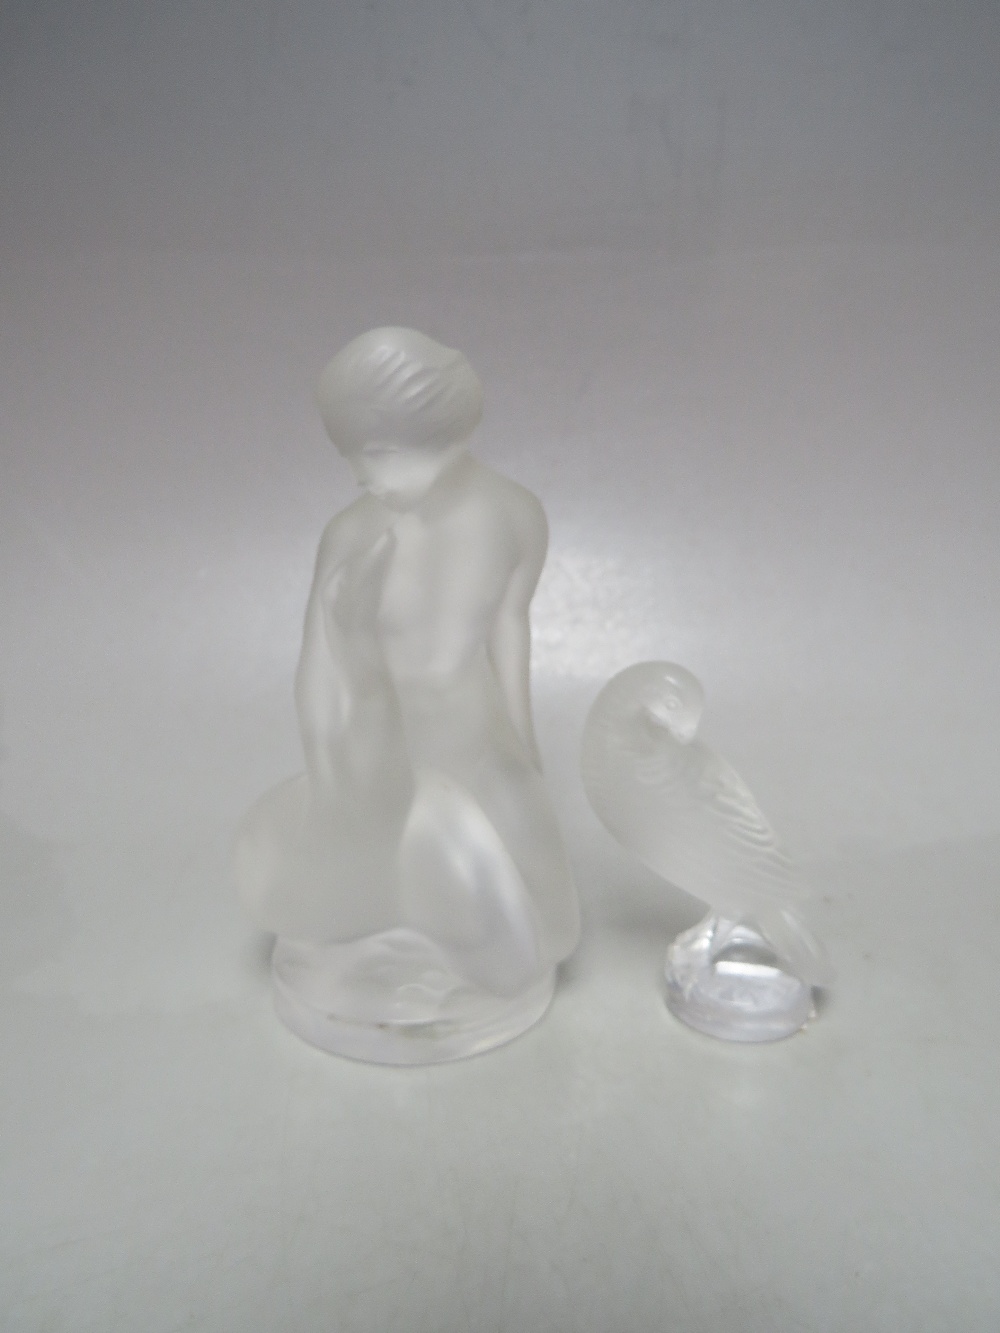 A LALIQUE FROSTED GLASS FIGURE OF A FEMALE NUDE WITH GOOSE, etched Lalique, France to base alongside - Image 7 of 7